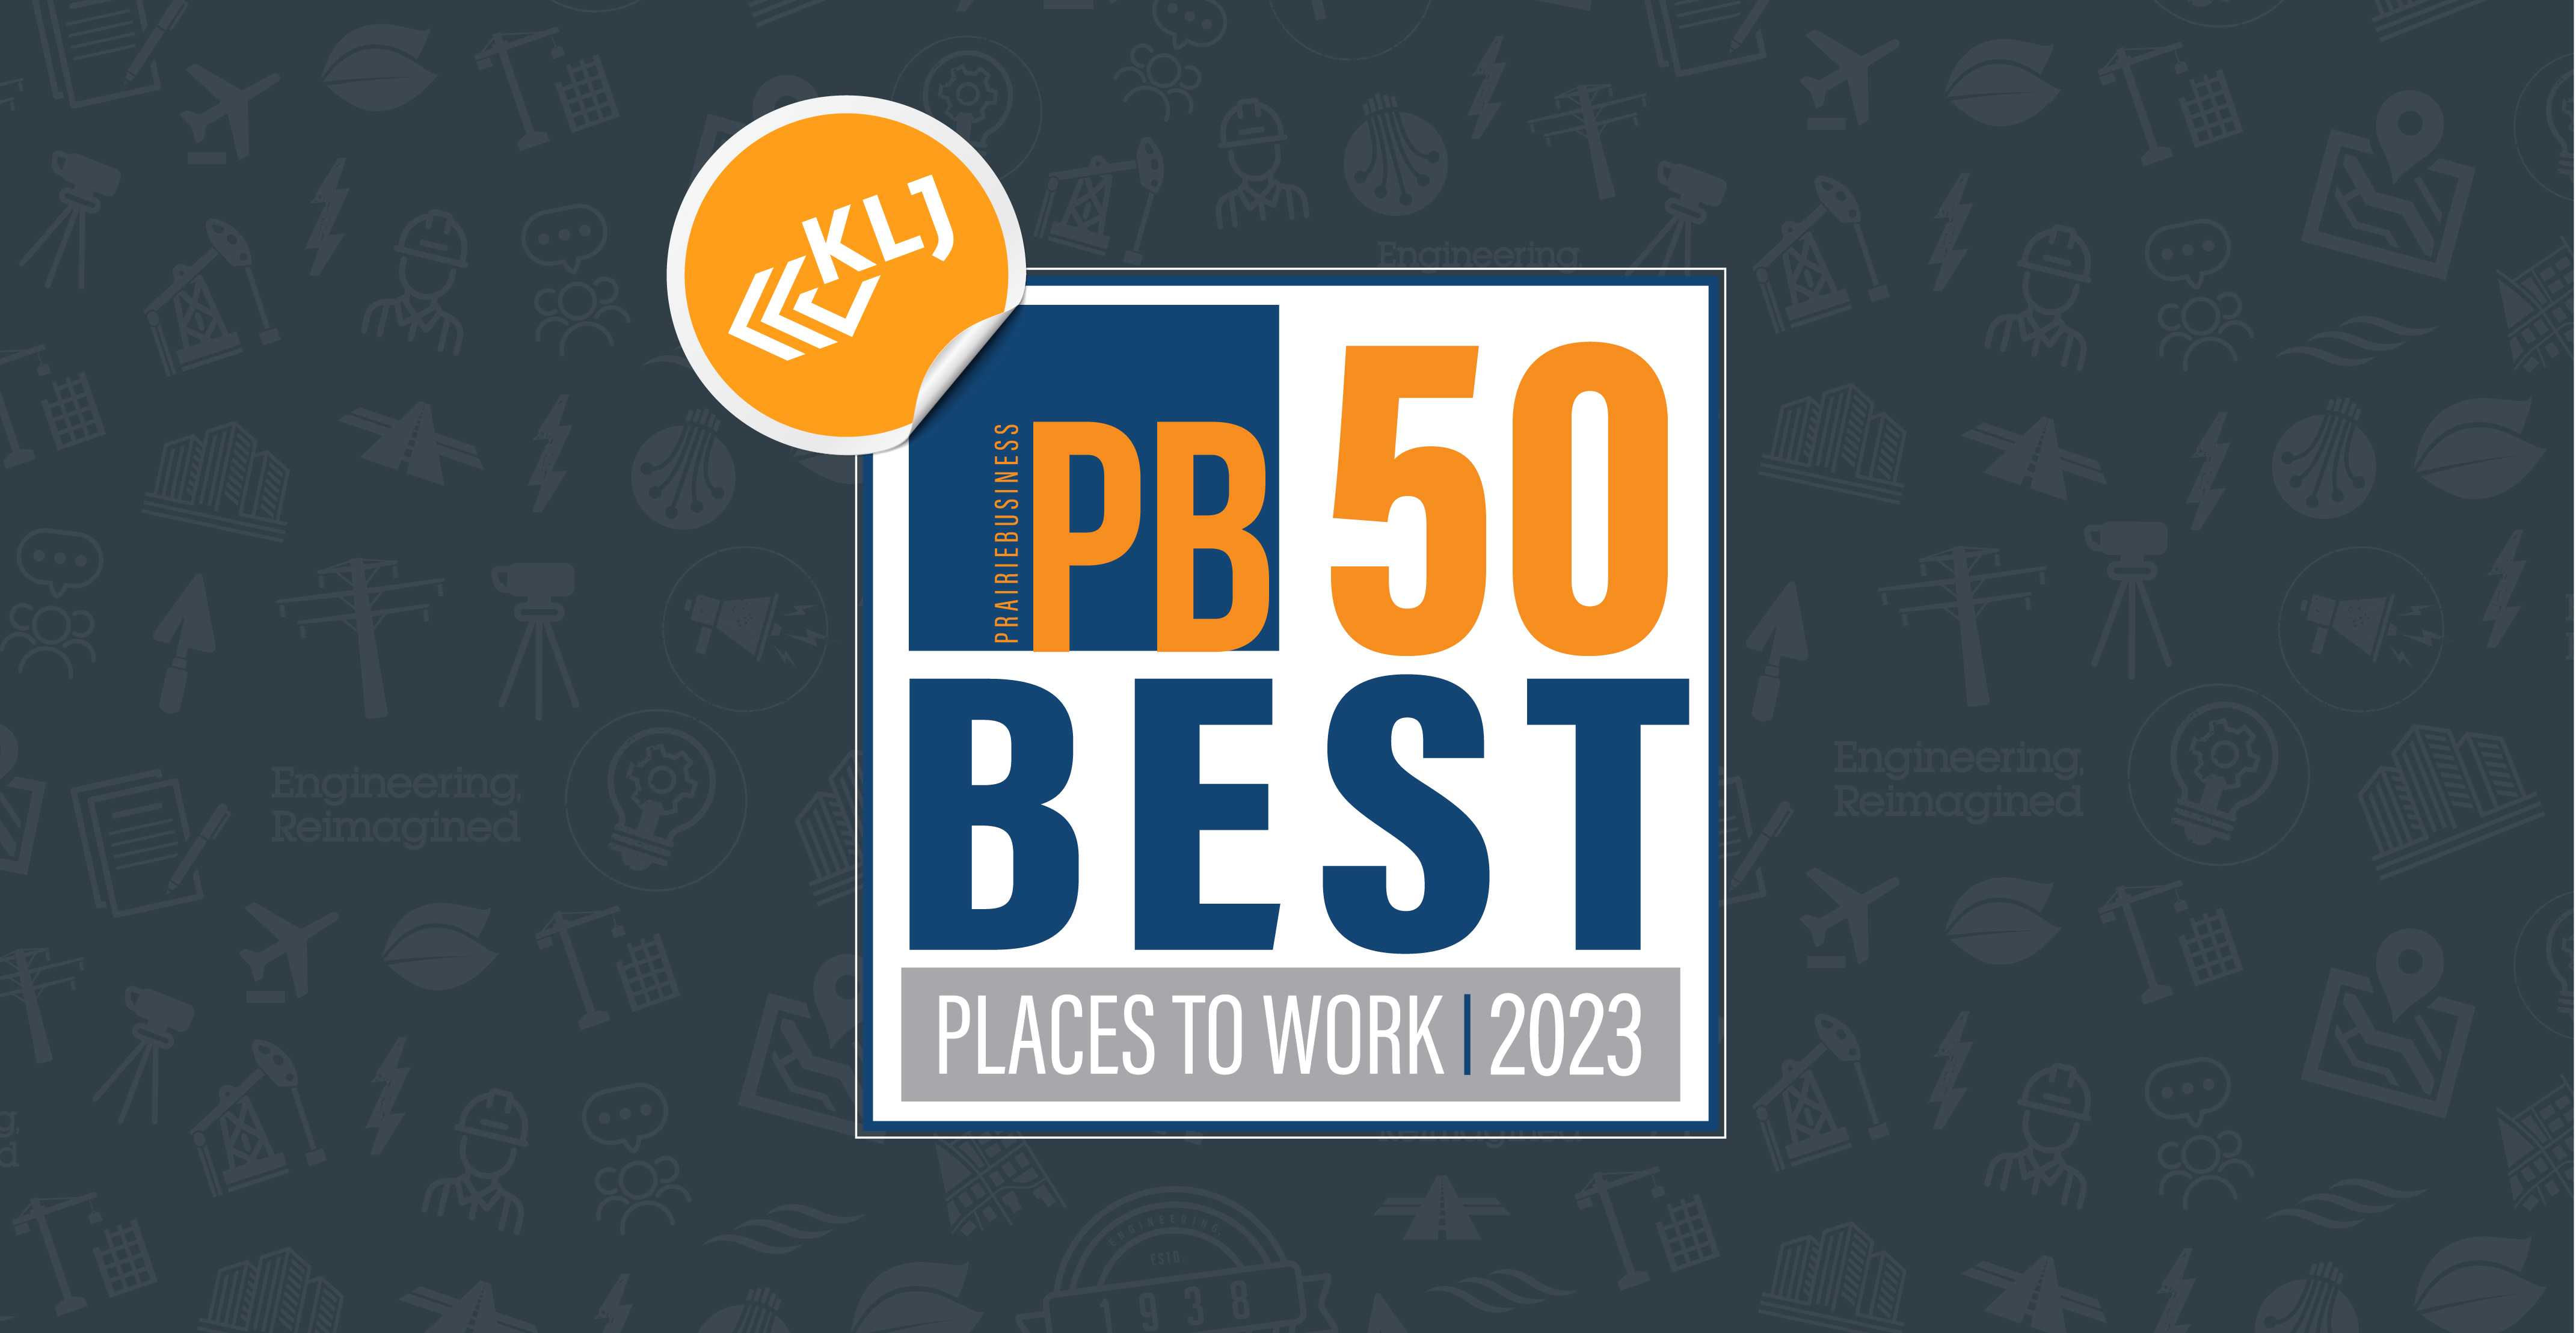 KLJ Selected As Best Places to Work